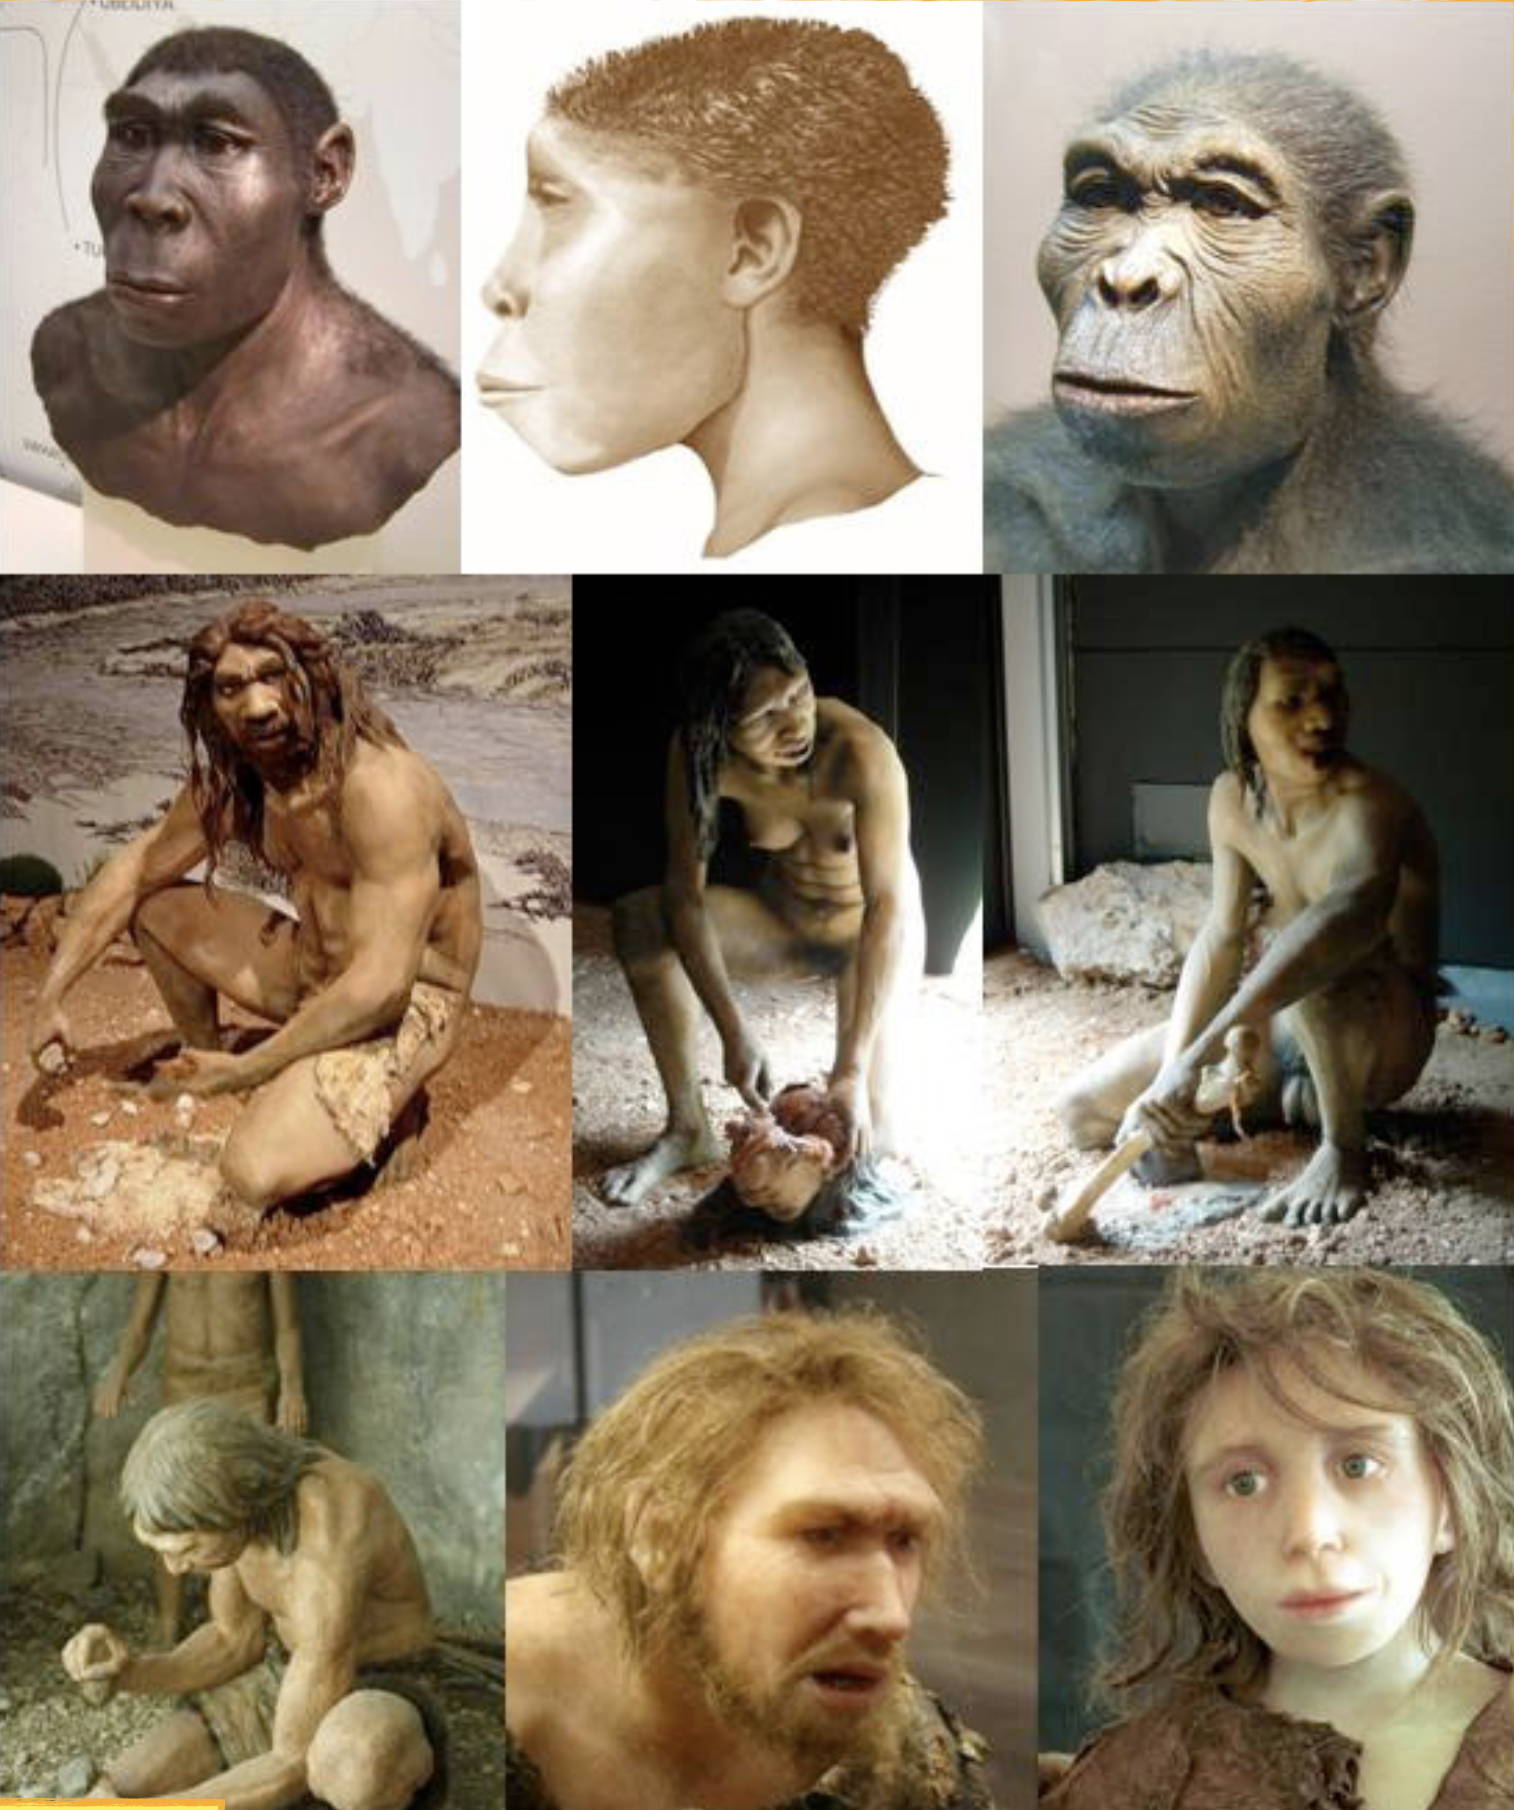 Examples of early humans, including Neanderthals and Homo sapiens